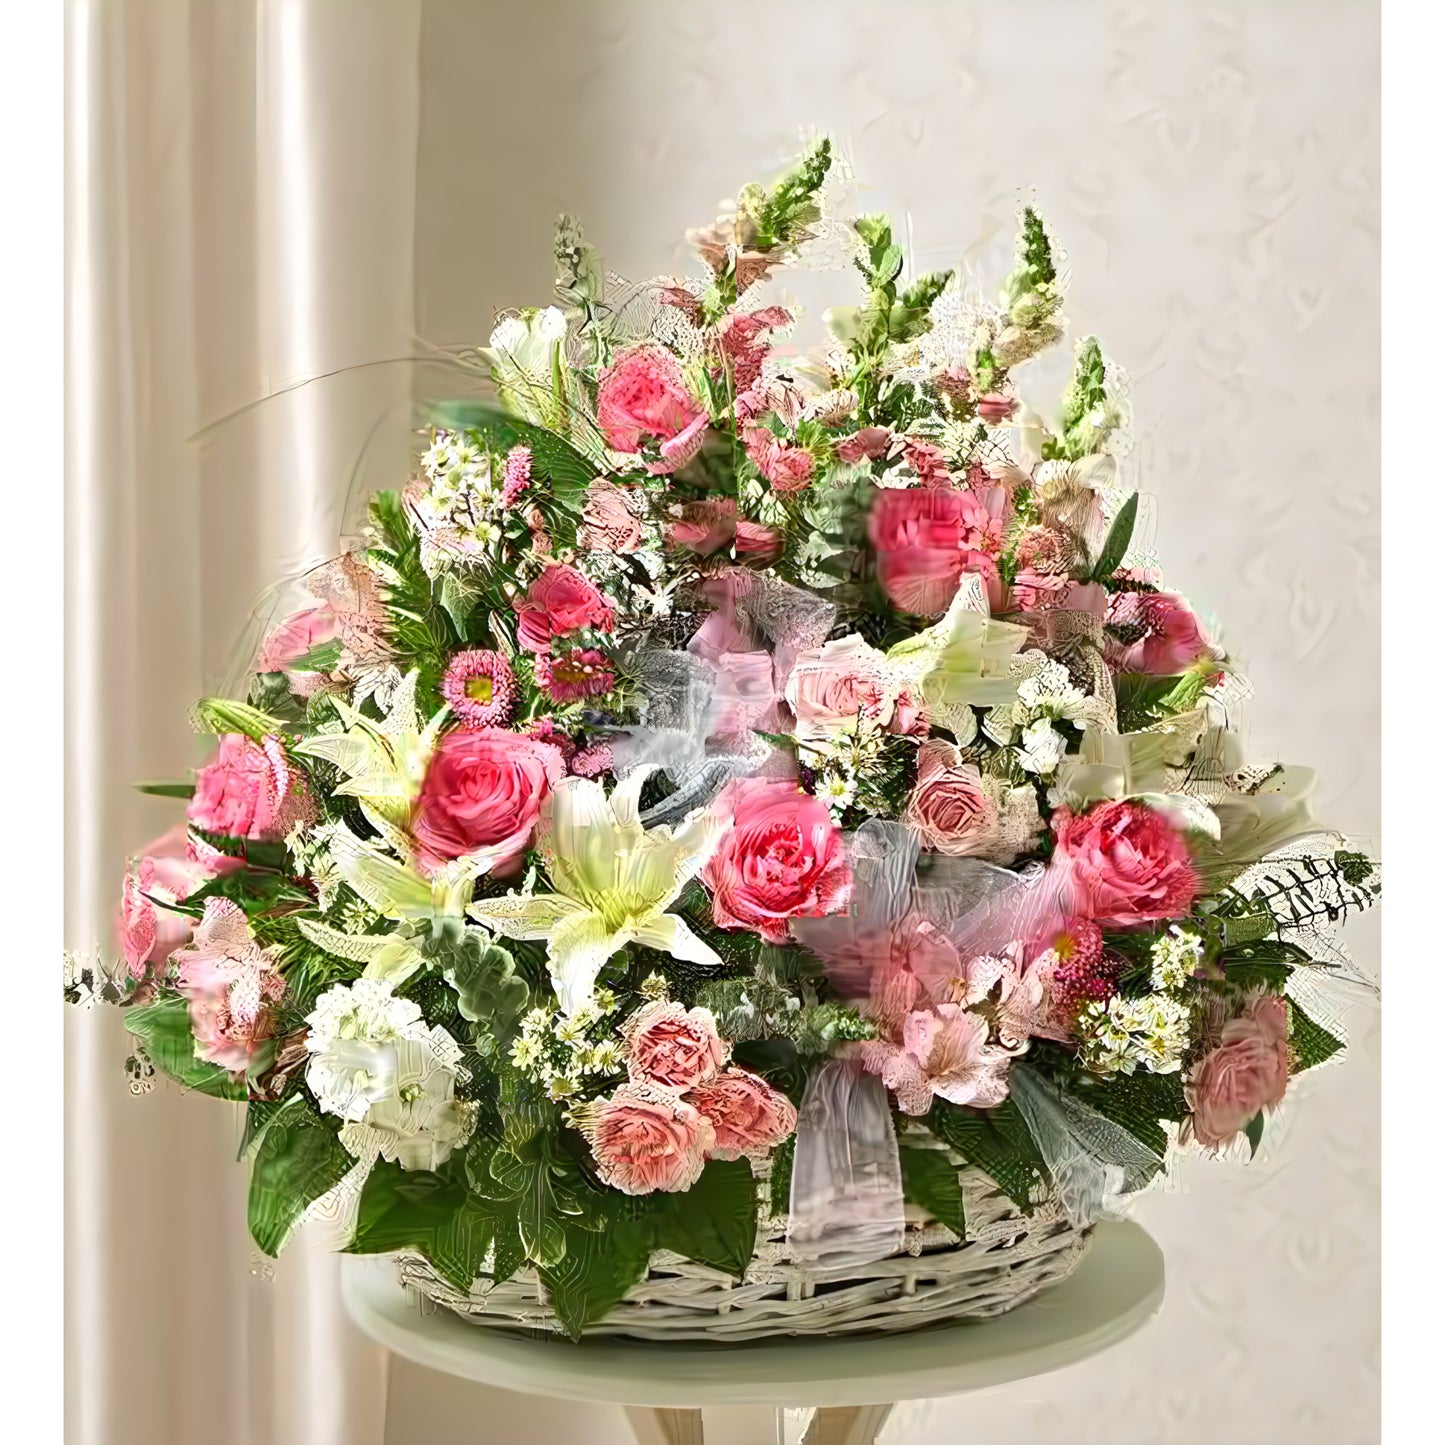 Pink and White Sympathy Arrangement in Basket - Funeral > For the Service - Queens Flower Delivery